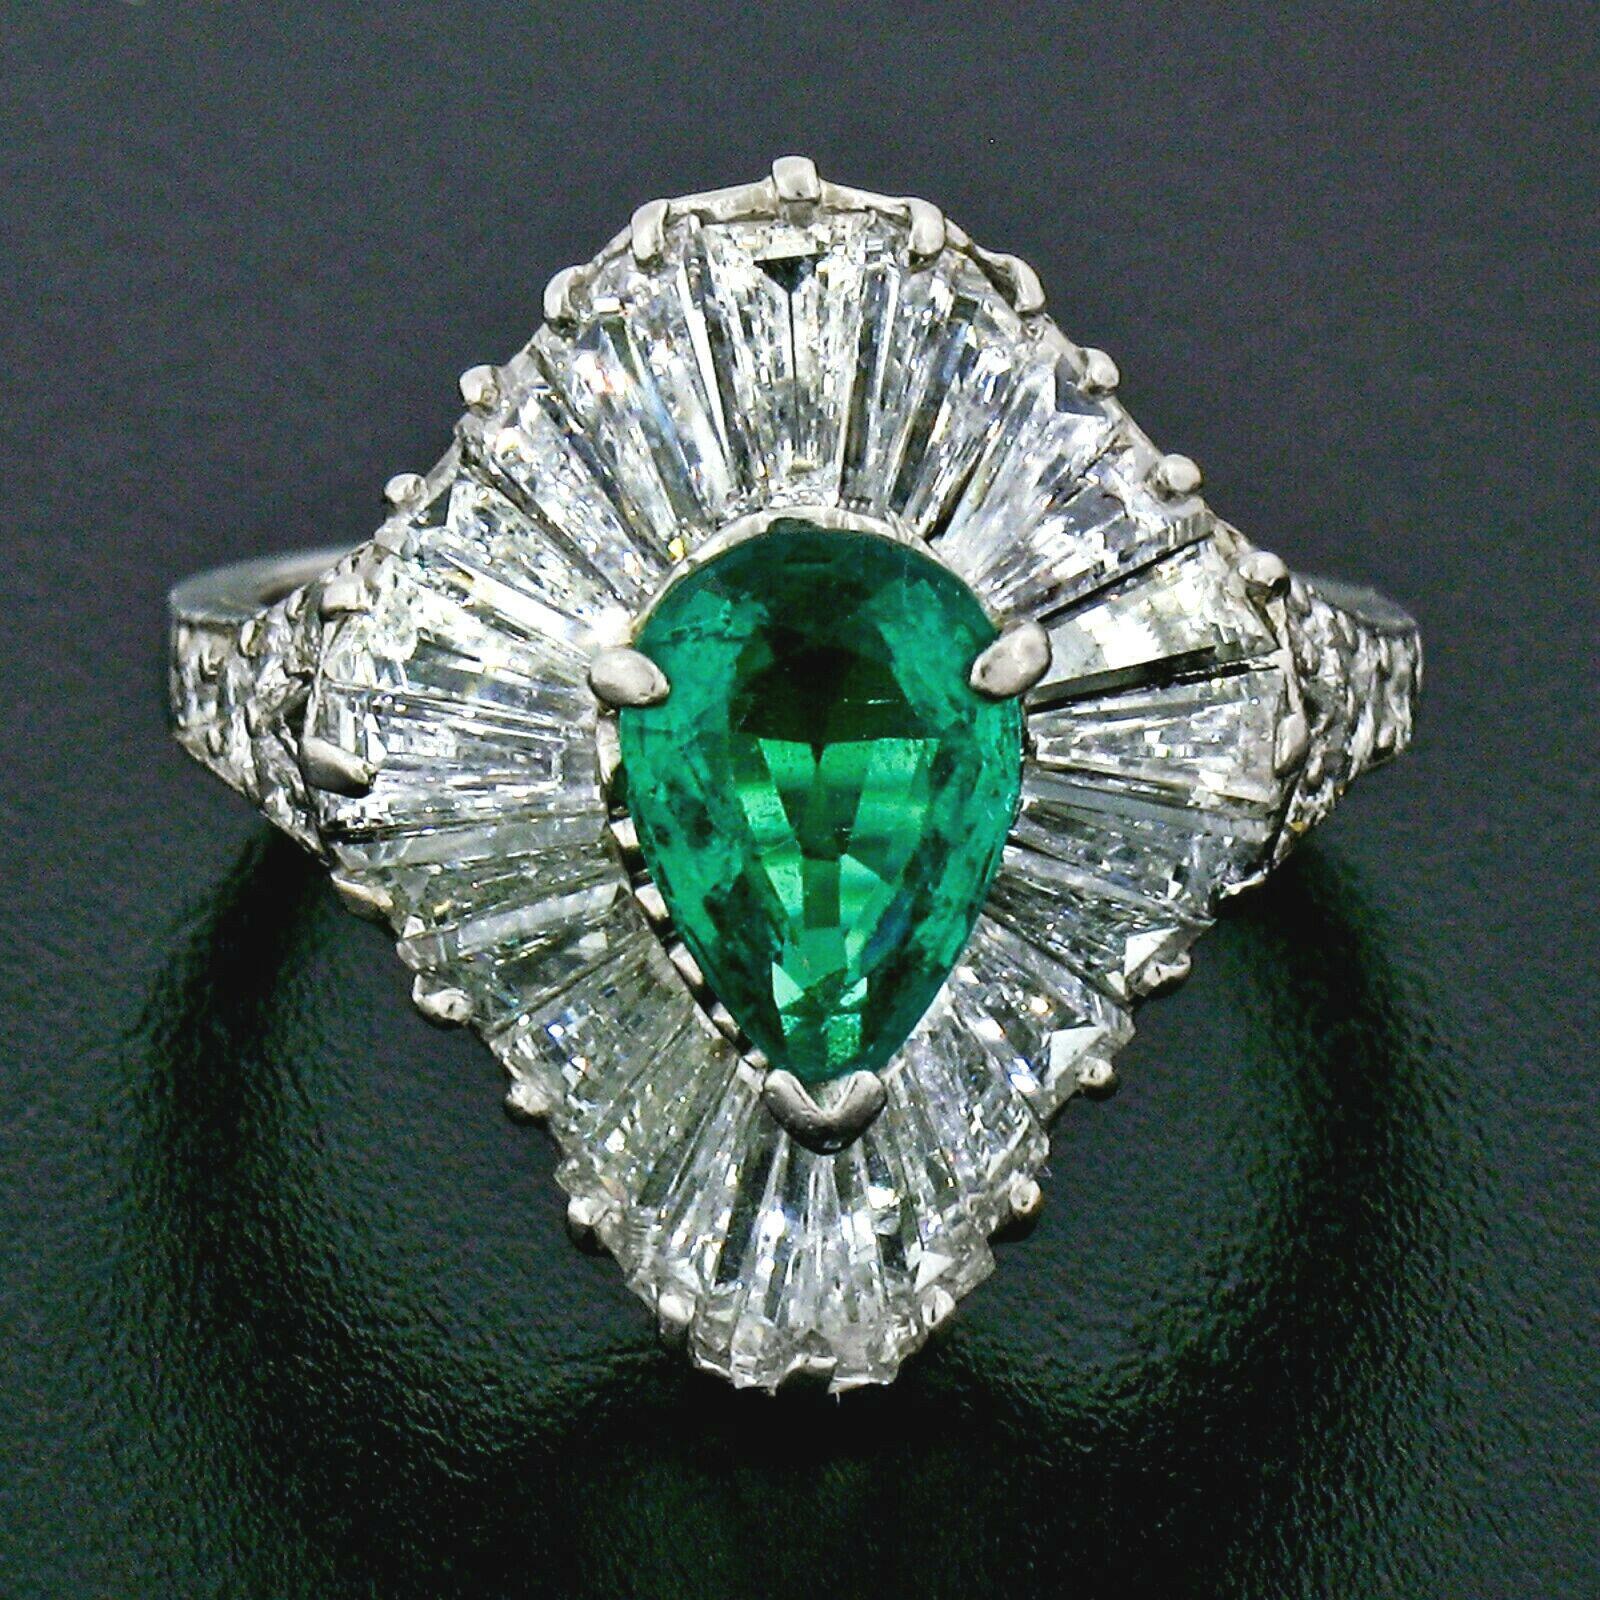 You are looking at a truly unique and breathtaking, AGL certified, genuine emerald and diamond ballerina ring designed and crafted by Tiffany & Co. in solid platinum. The ring features a pear cut, Colombian emerald solitaire with an outstandingly